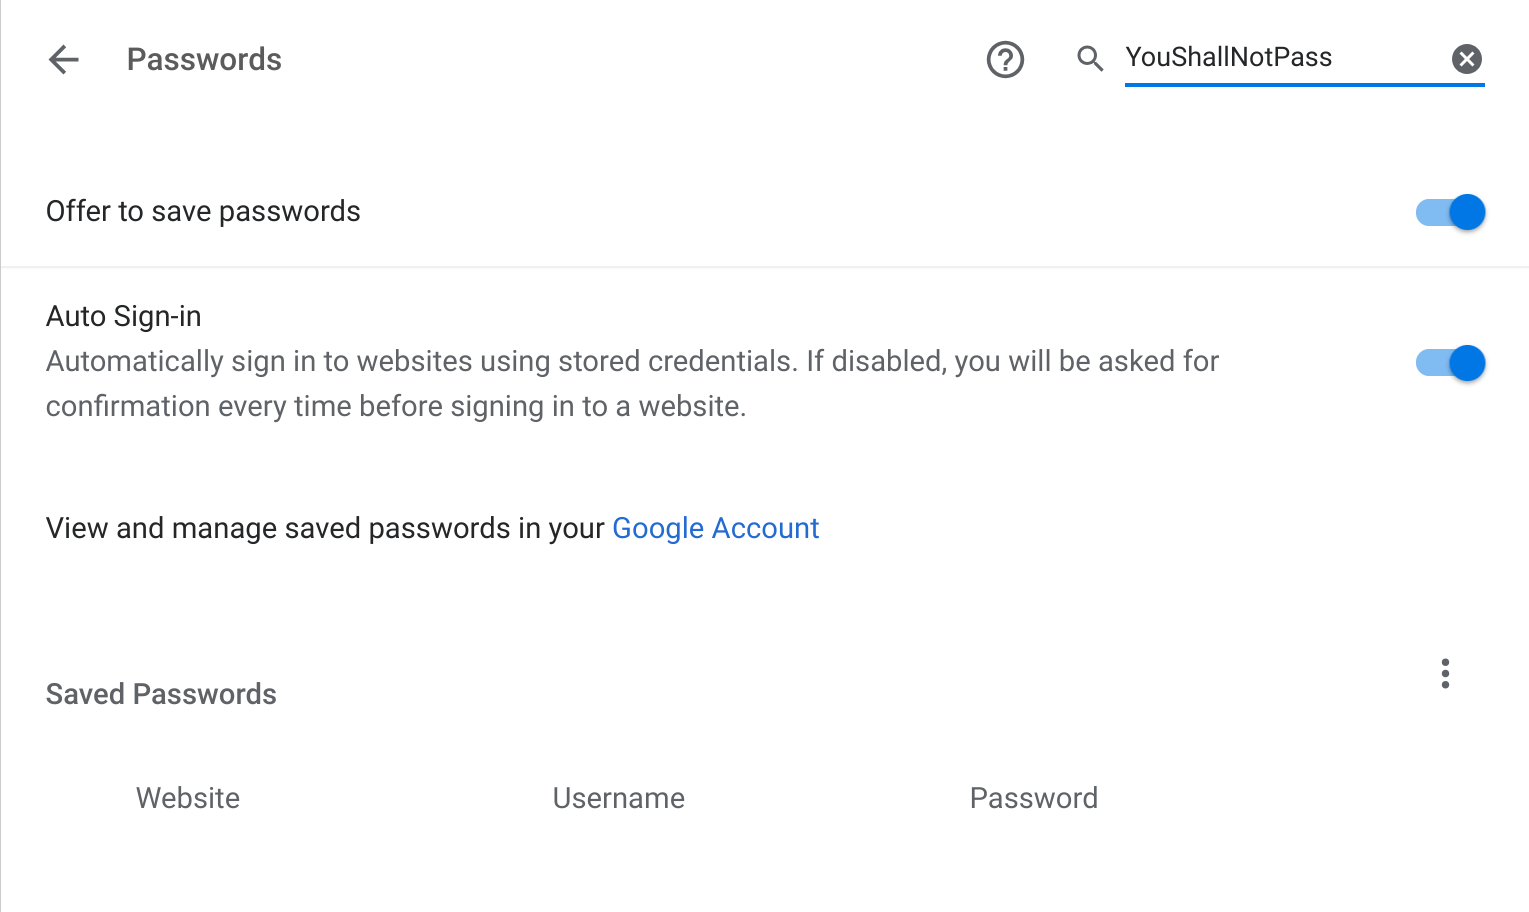 Chrome OS may add extra security to view passwords saved in a Google account